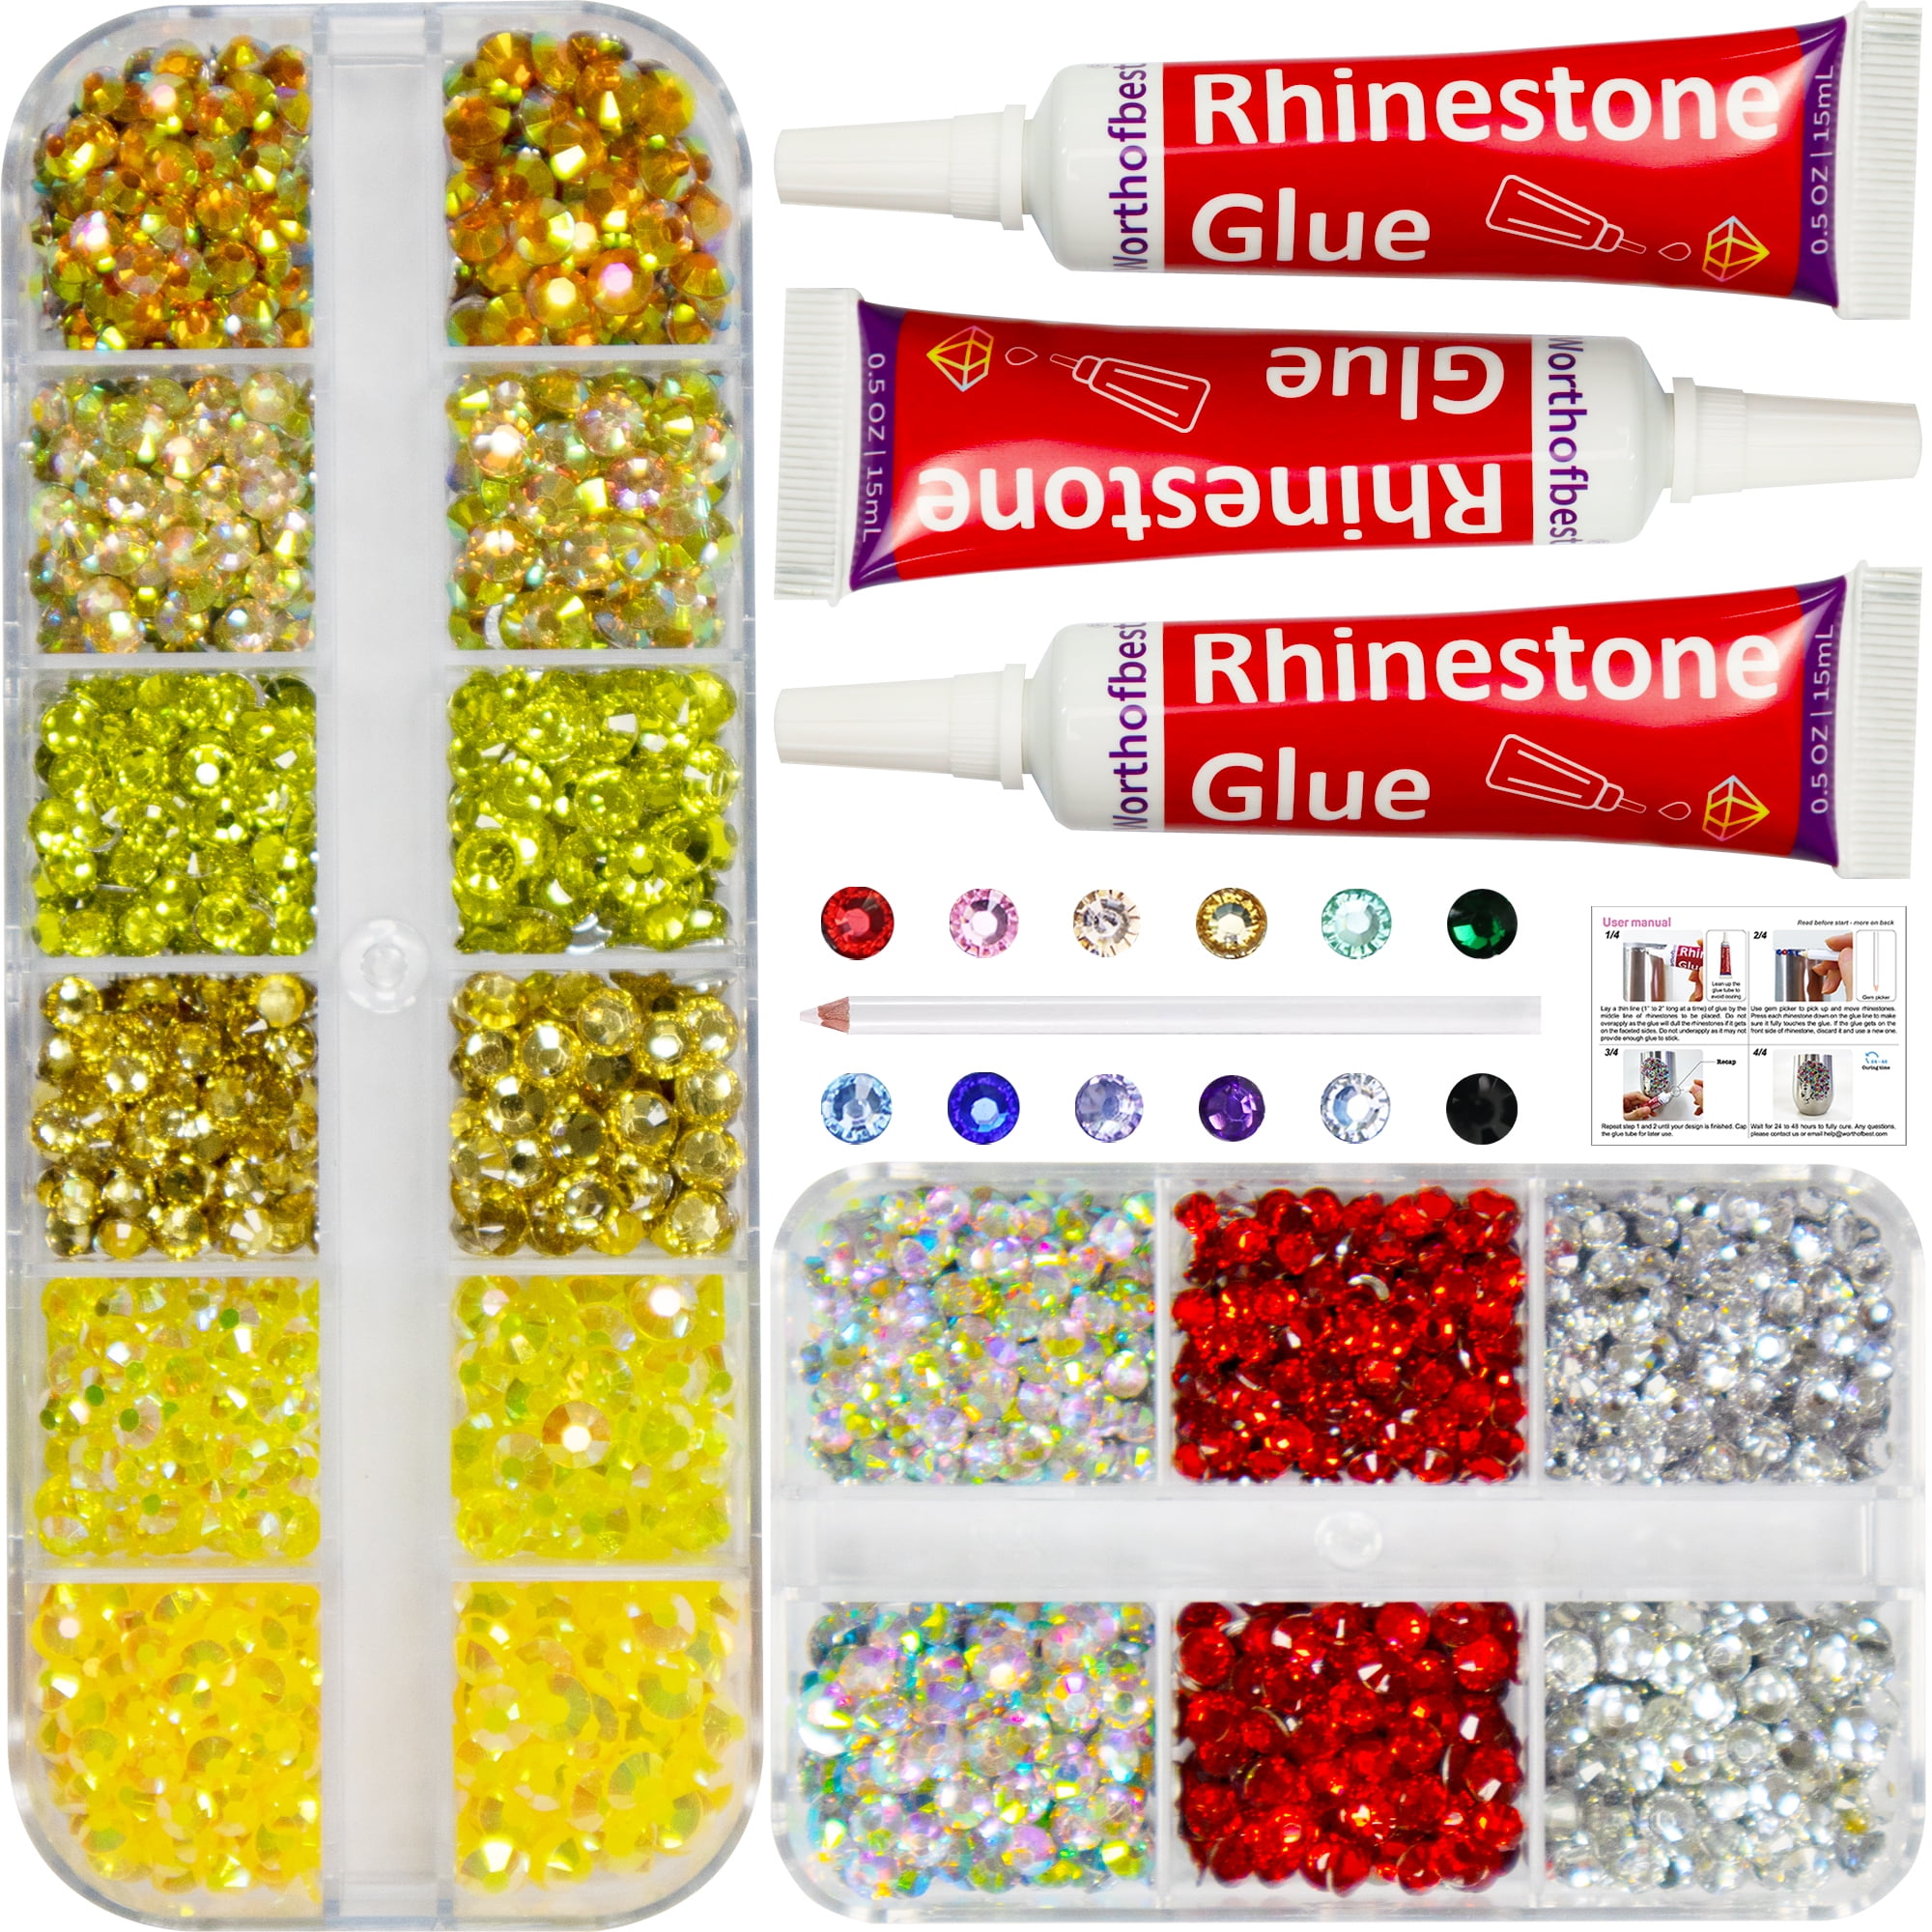 Briskbloom 60g Mix Flatback Pearls and Rhinestones for Crafts, 3620PCS  Flatback Pearl Rhinestones for Tumblers Nail Face Art, Jelly Rhinestones  and Half Pearls, with Tweezers Wax Pen, White, Blue